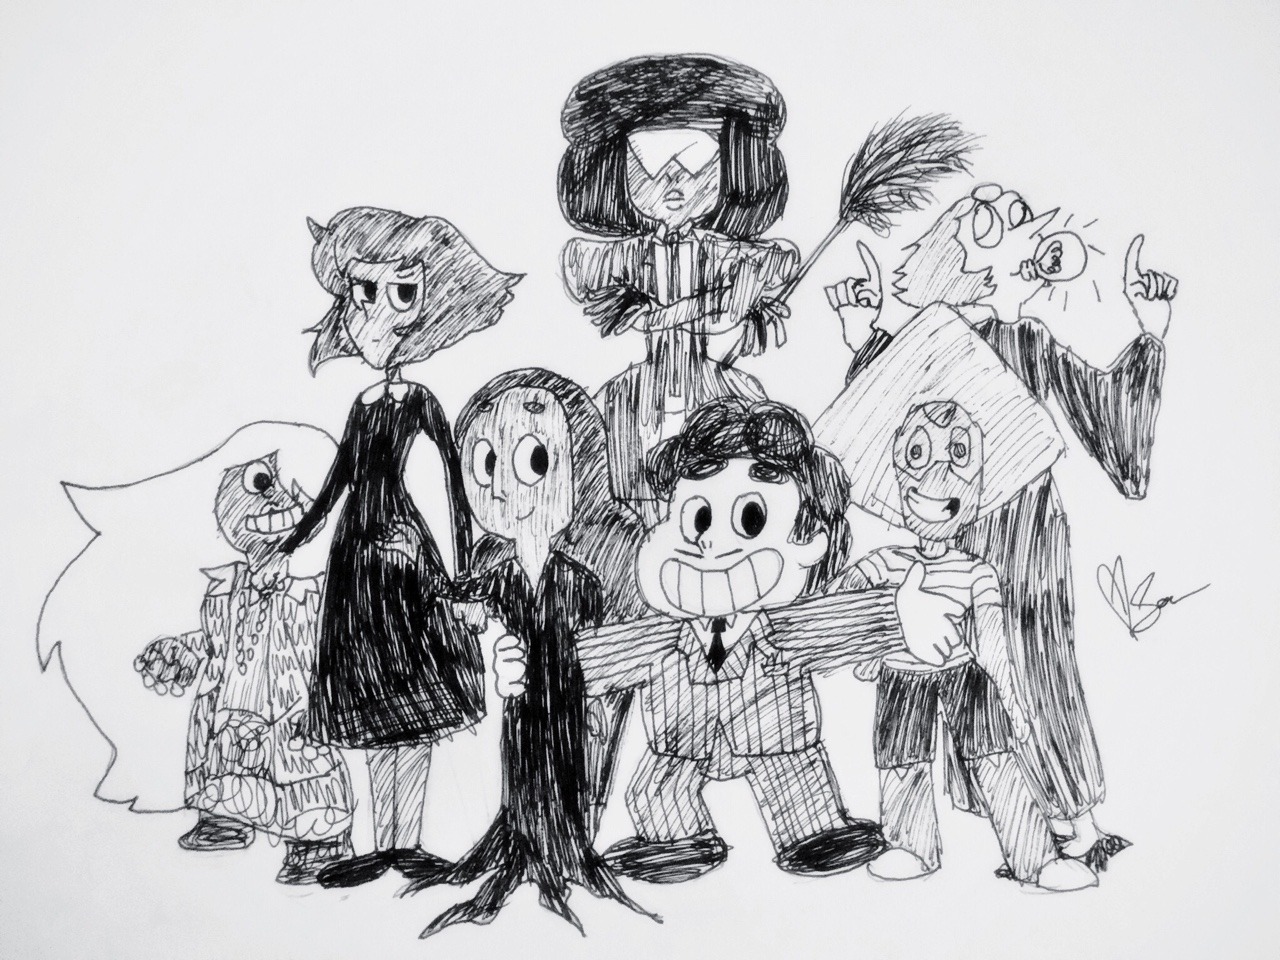 Day 22: Draw any group or family from television/film (or your own family!) as if they were The Addams Family. It was inevitable that I’d draw Steven Universe at least ONCE this month lol